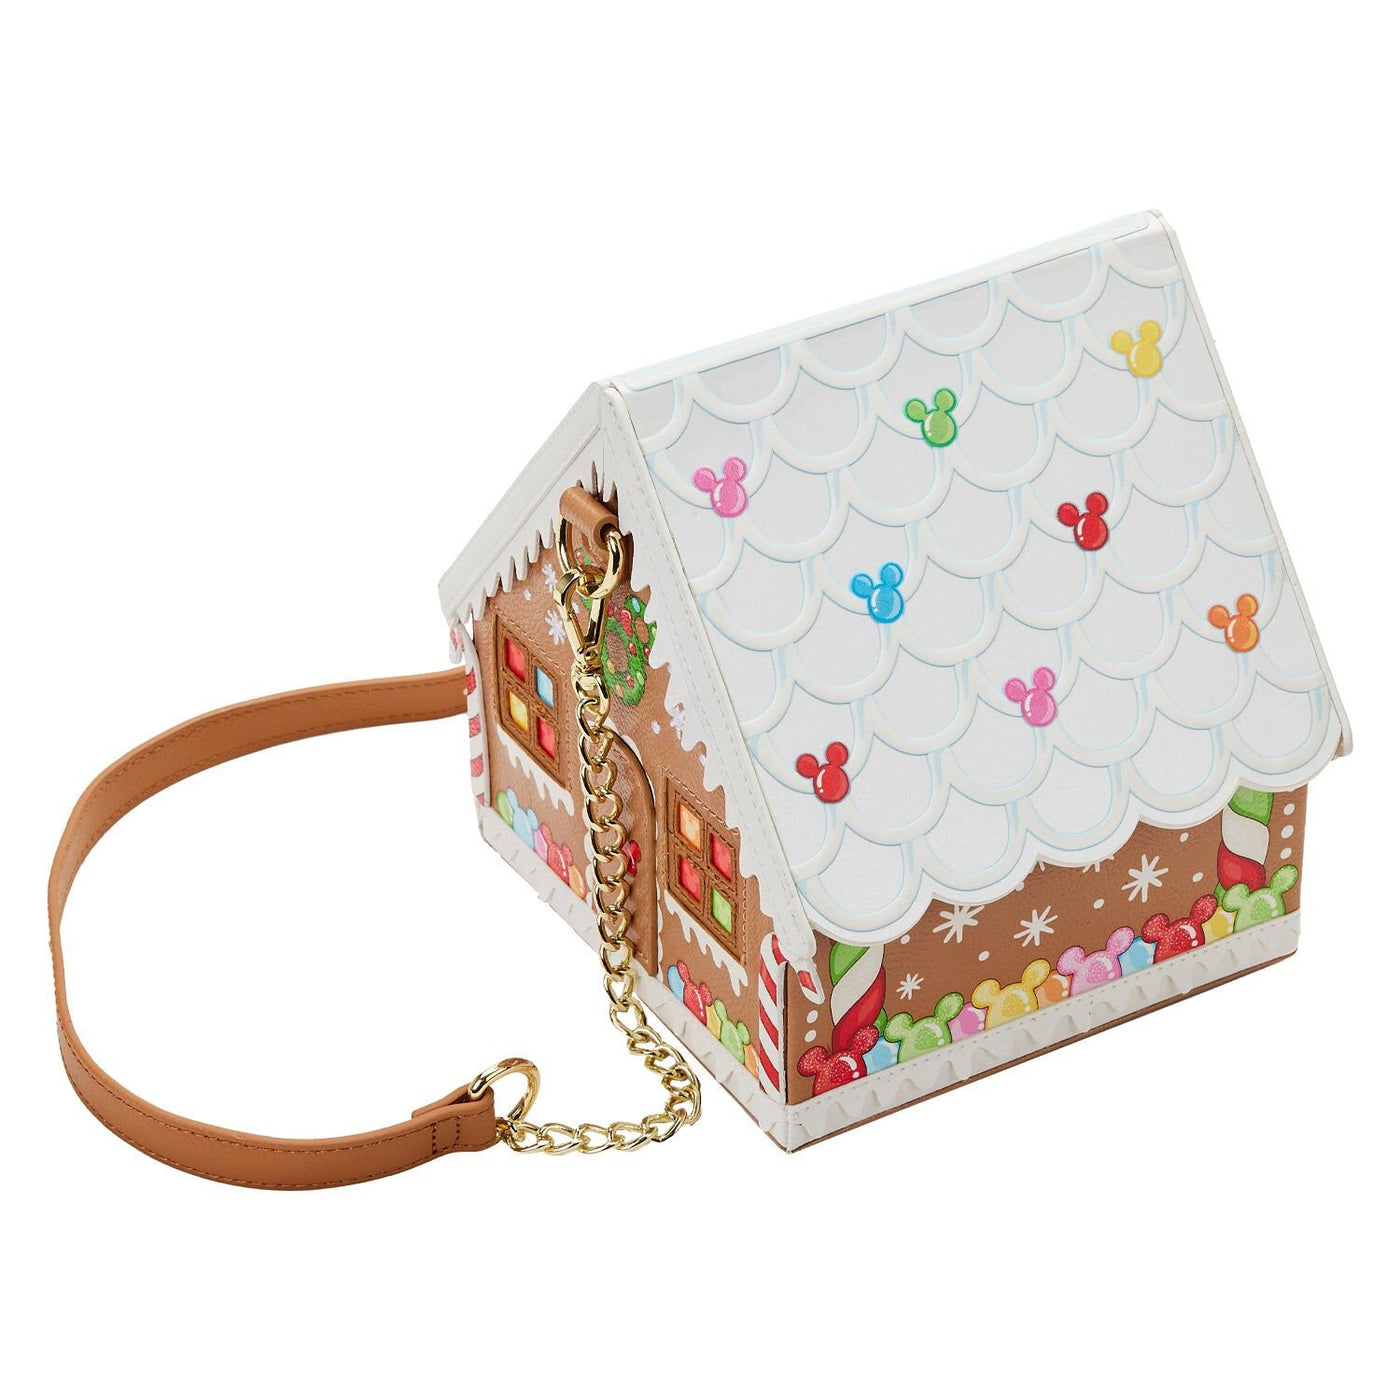 Stitch Shoppe by Loungefly Disney Minnie Mouse Gingerbread House Crossbody Bag - Top - 671803441842